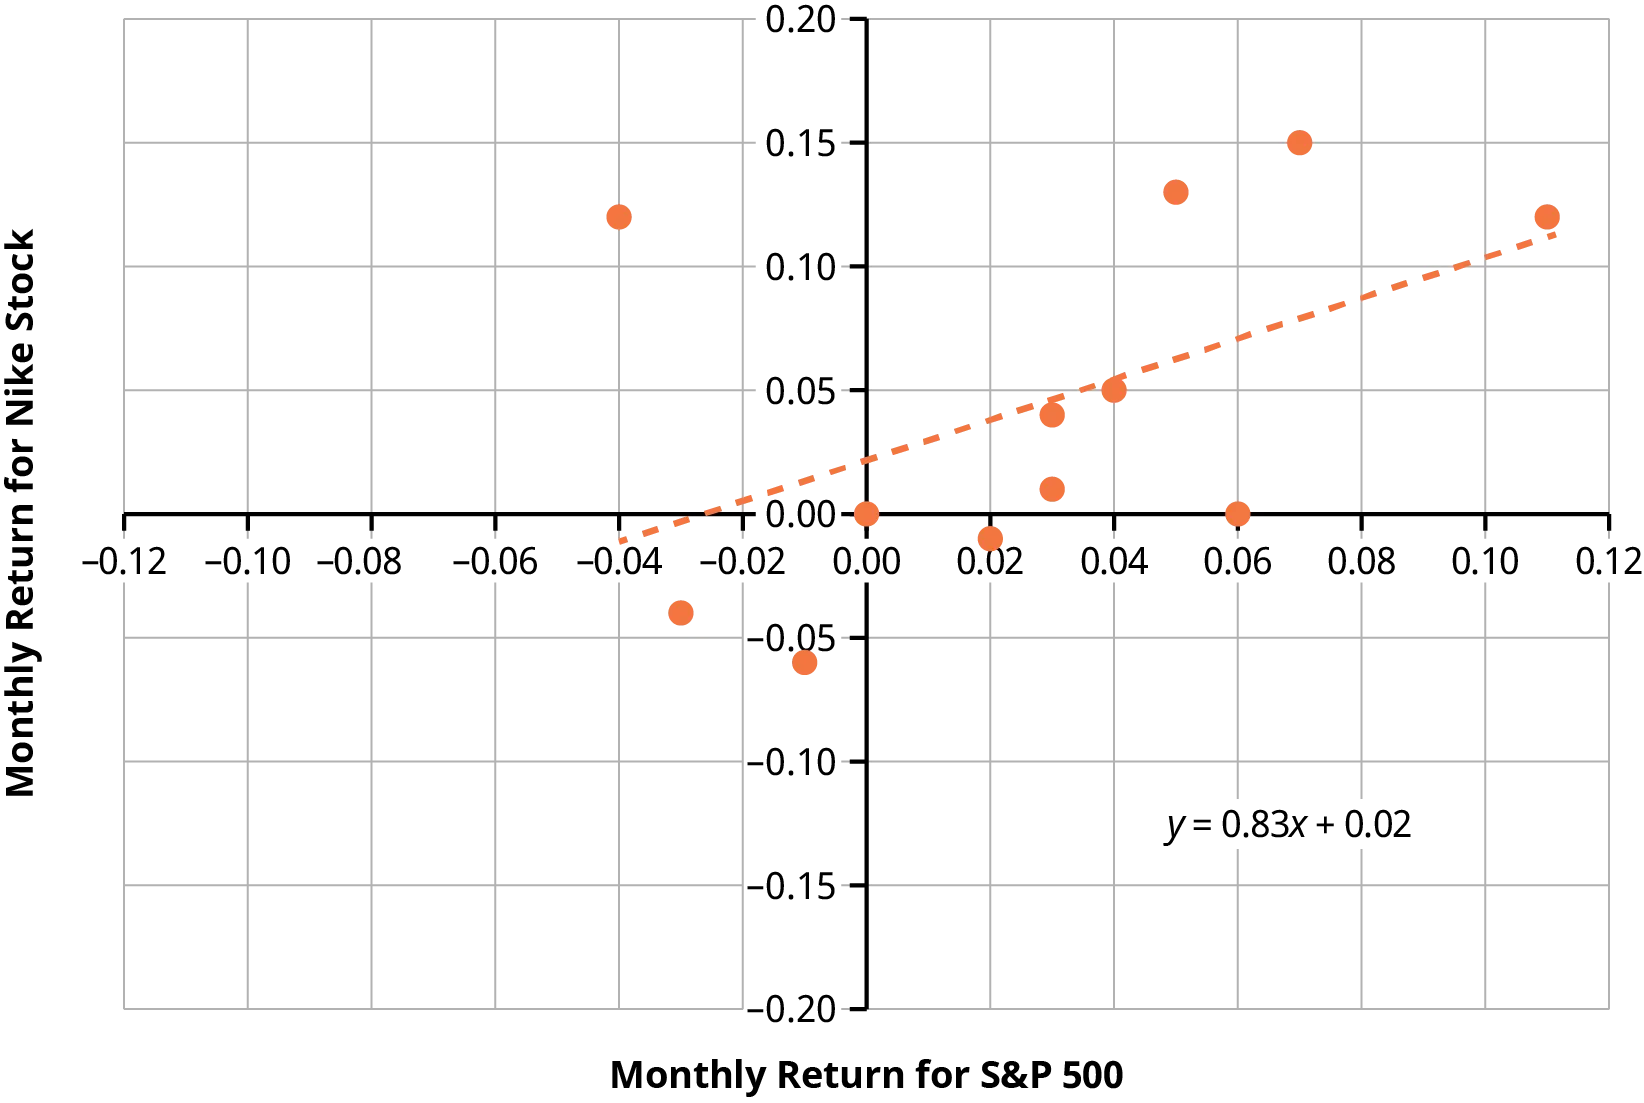 A scatter plot of the monthly return for Nike stock against the monthly return for the S&P 500 index shows a dashed regression line through the scatter points. This is a regression line corresponding to the slope of 0.83 and the formula y = 0.83x + 0.02.